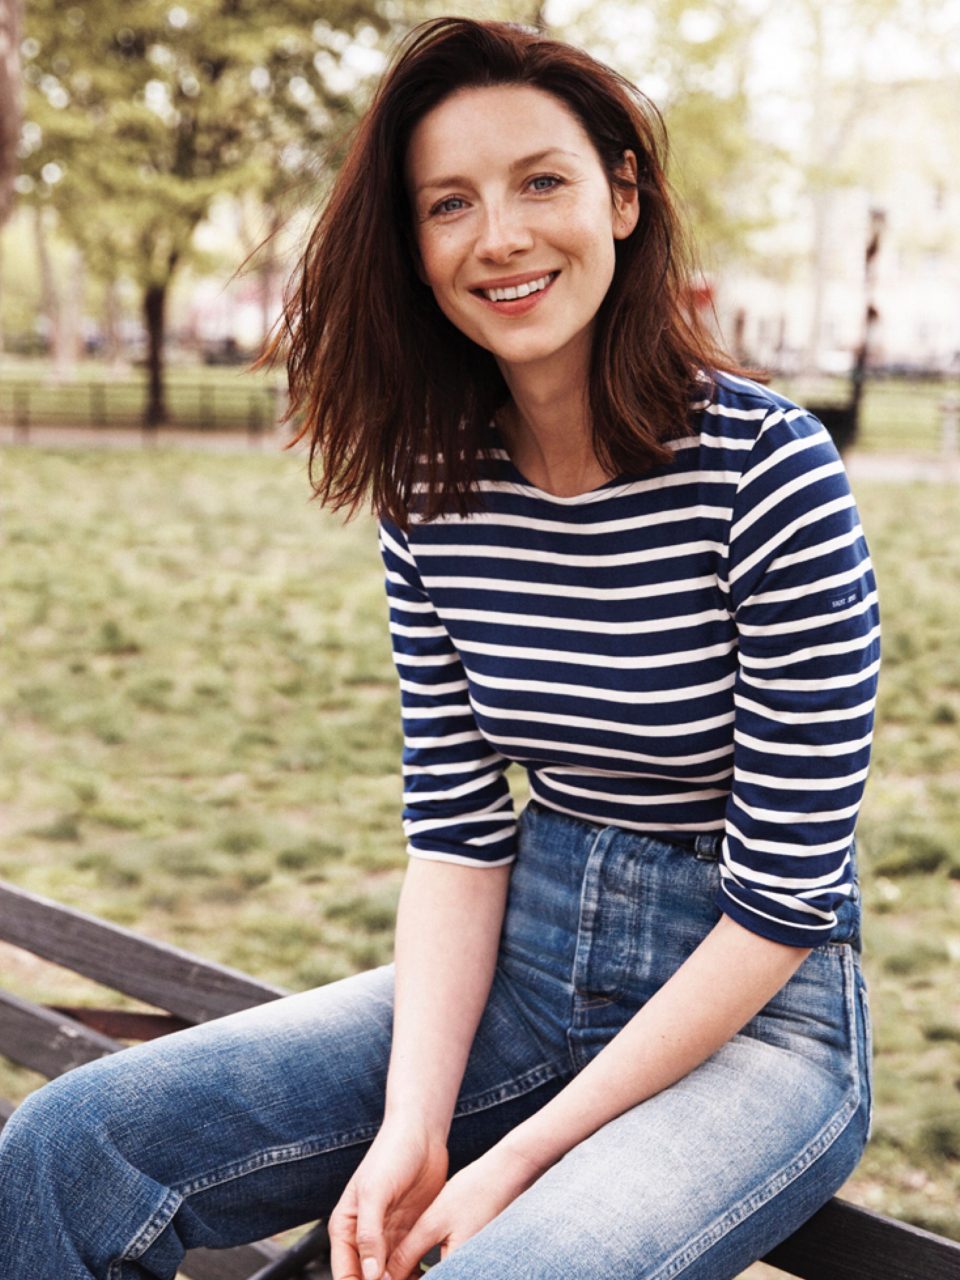 Caitriona Balfe In Jeans Smiling Picture